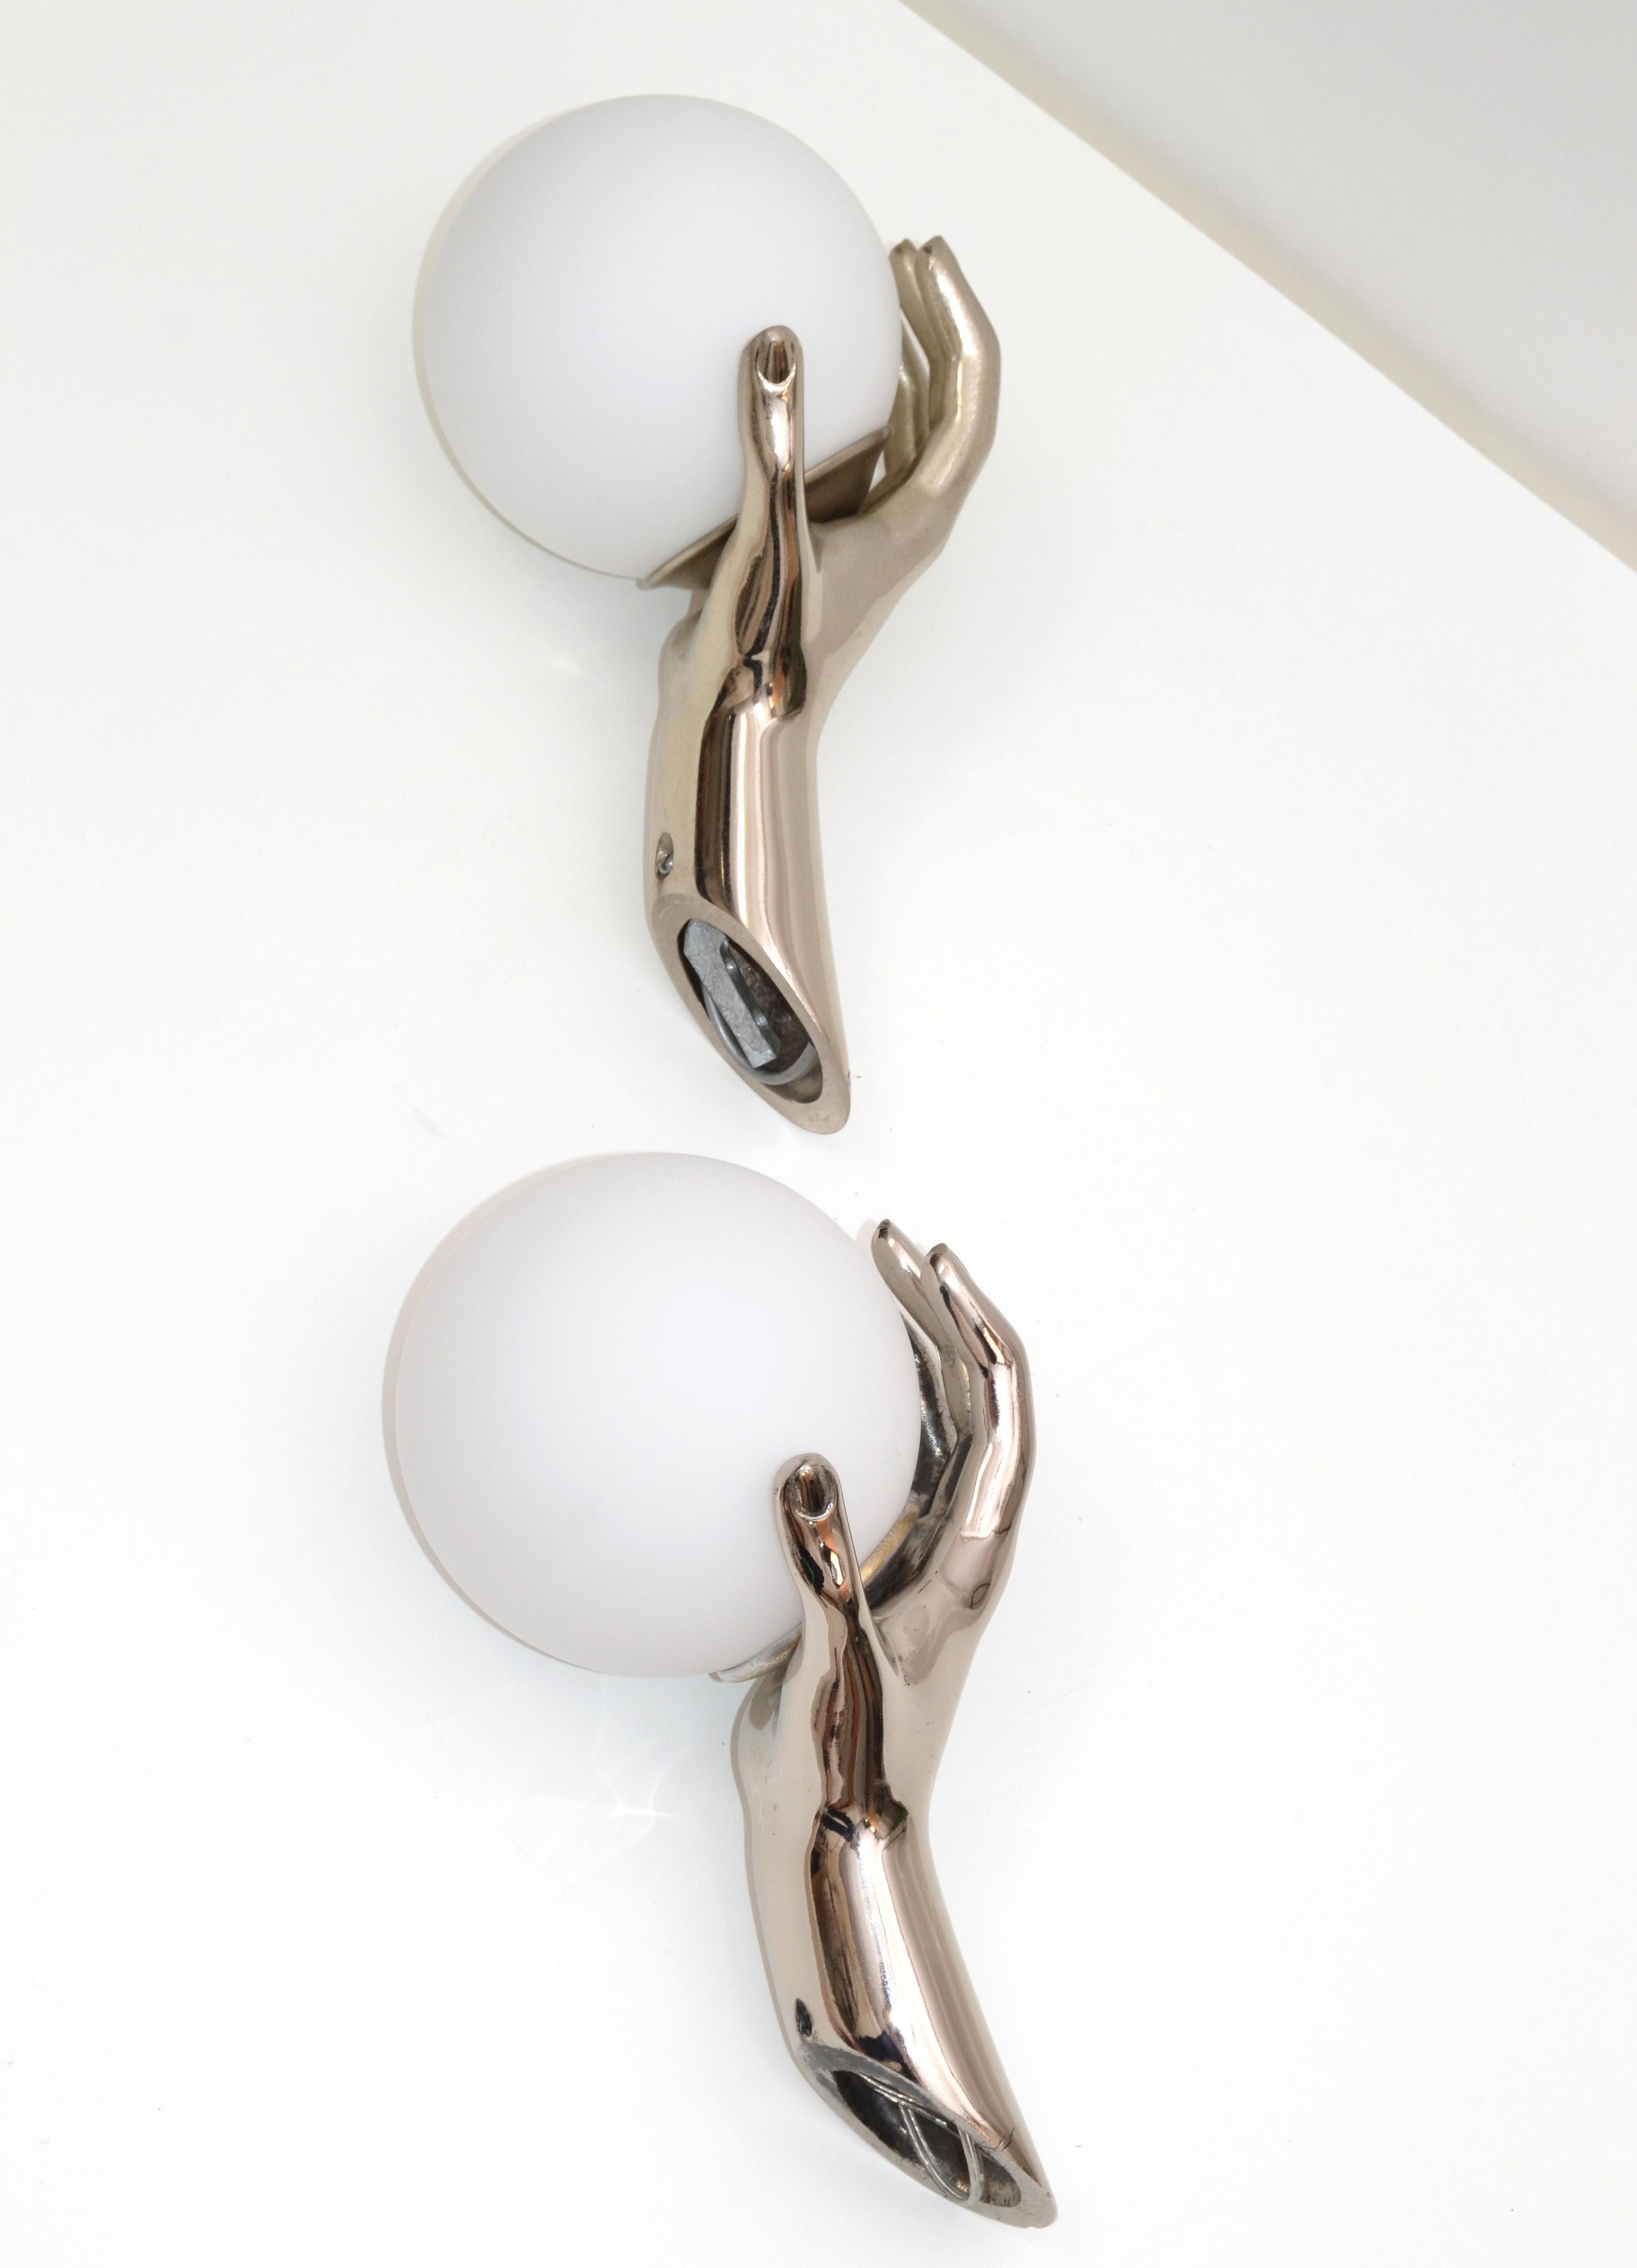 Maison Arlus French Silver Patina Hand Sconces and White Opaline Shades, 1970 For Sale 2